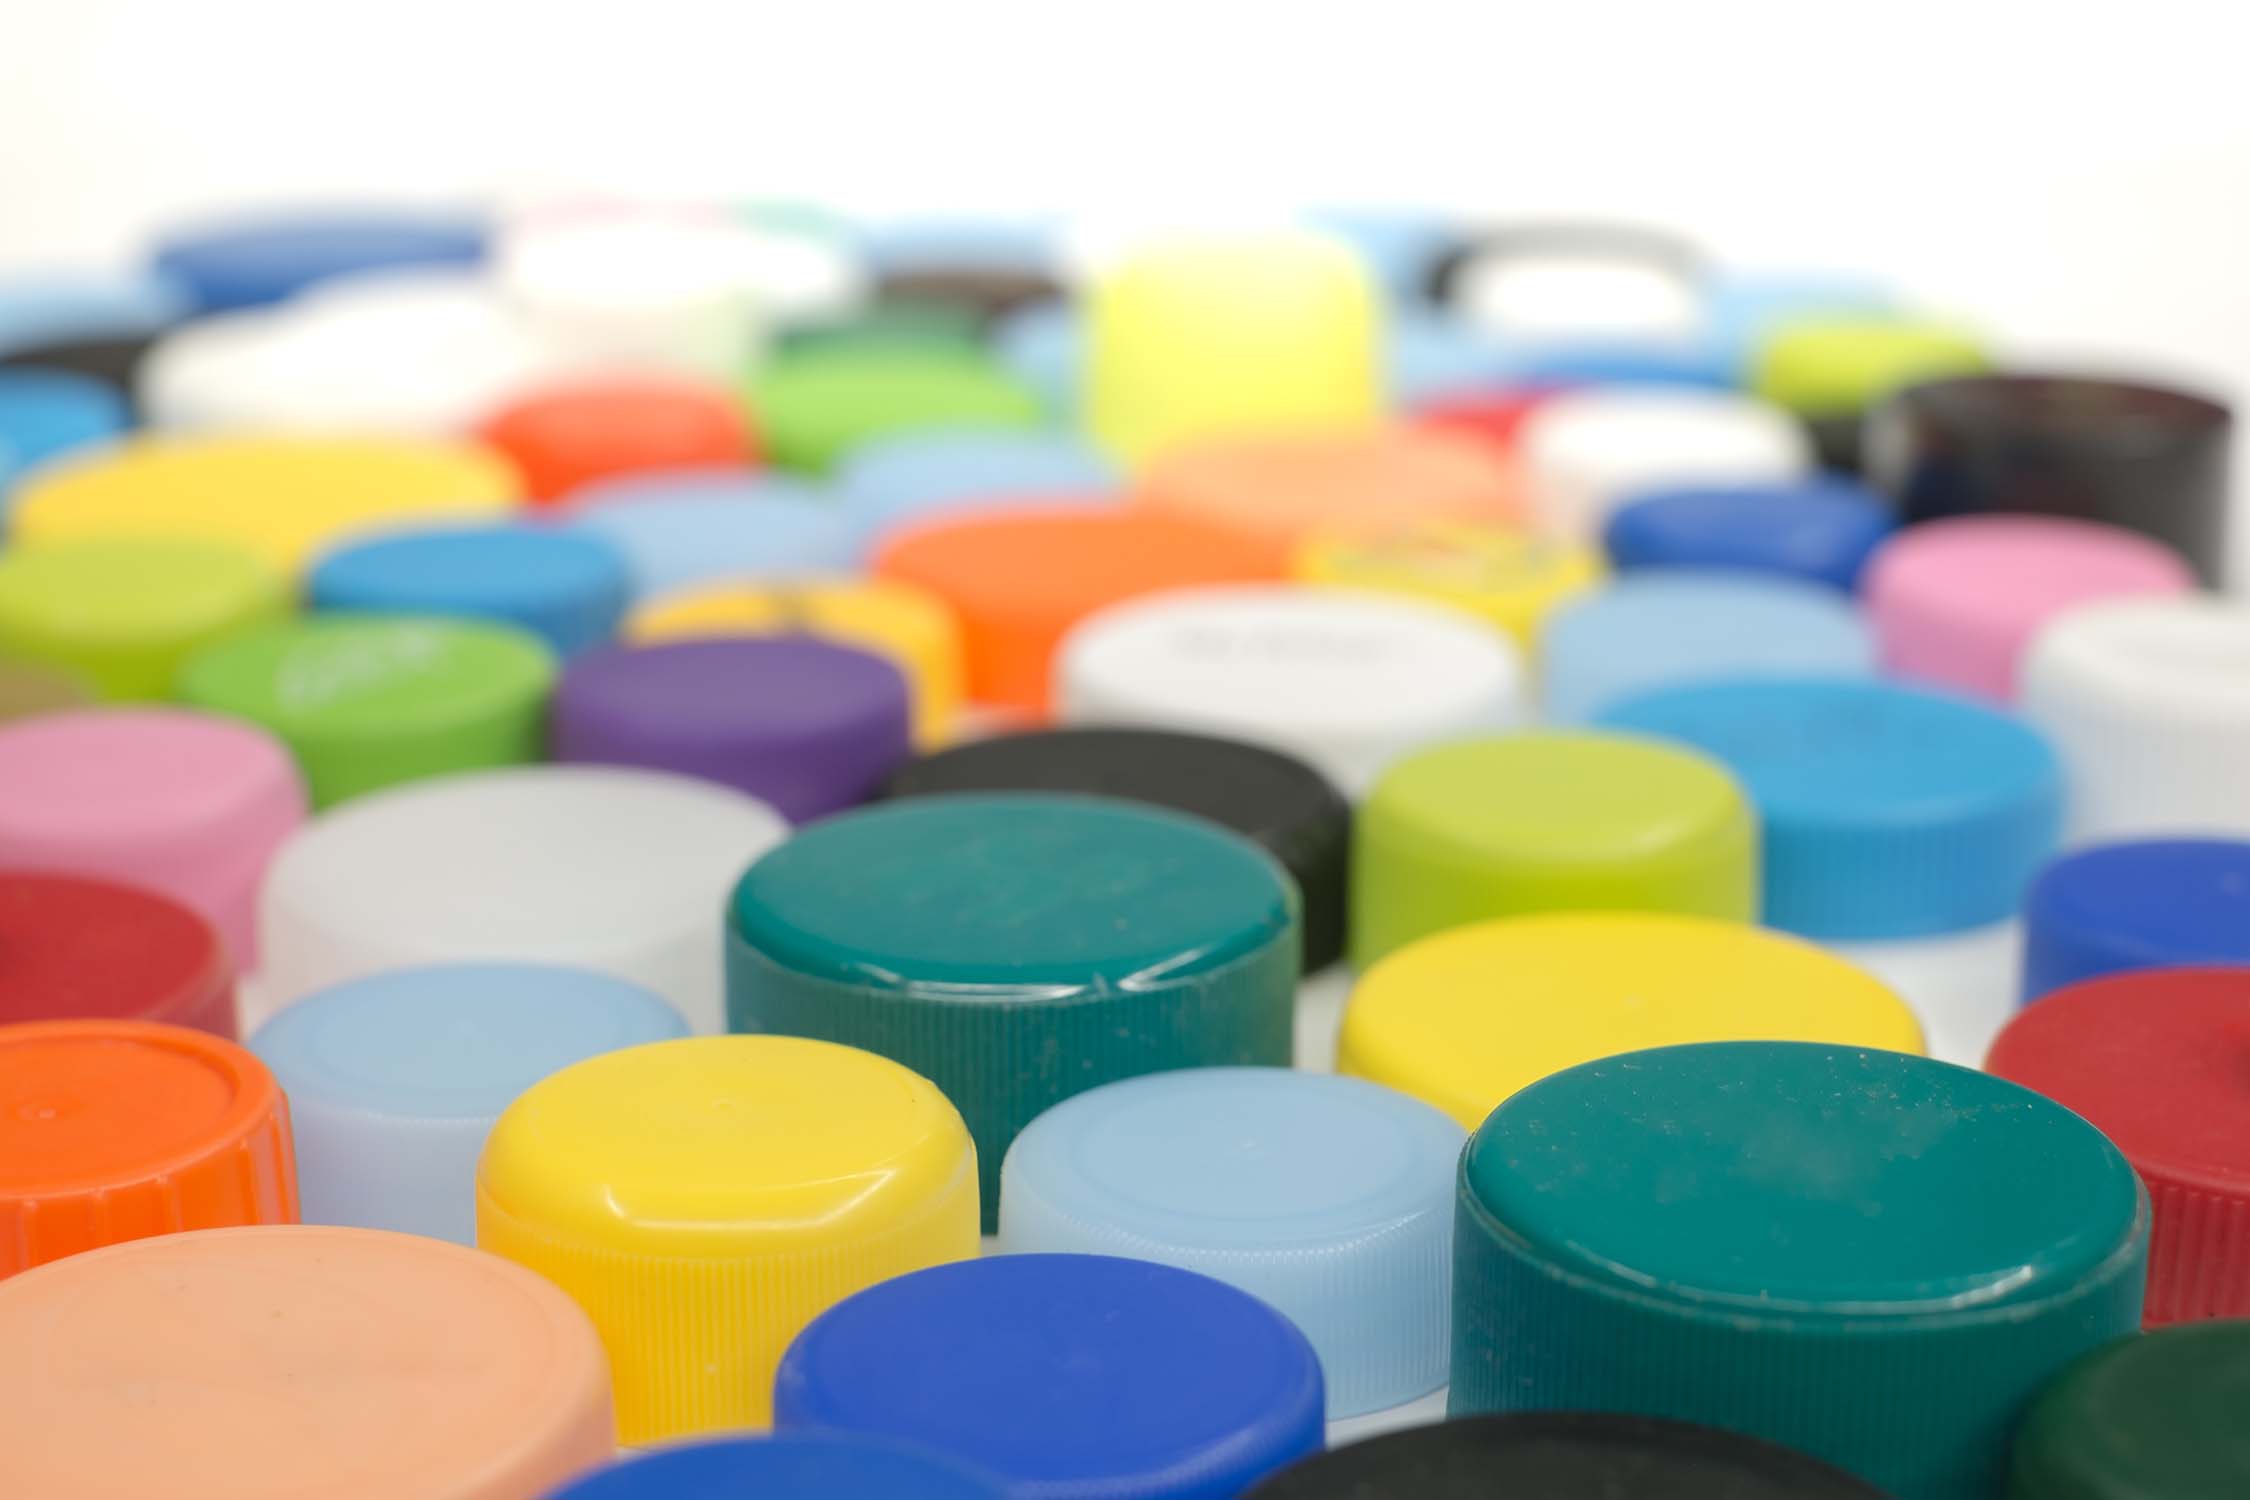 Over 50 multi-coloured spray paint lids and bottles.